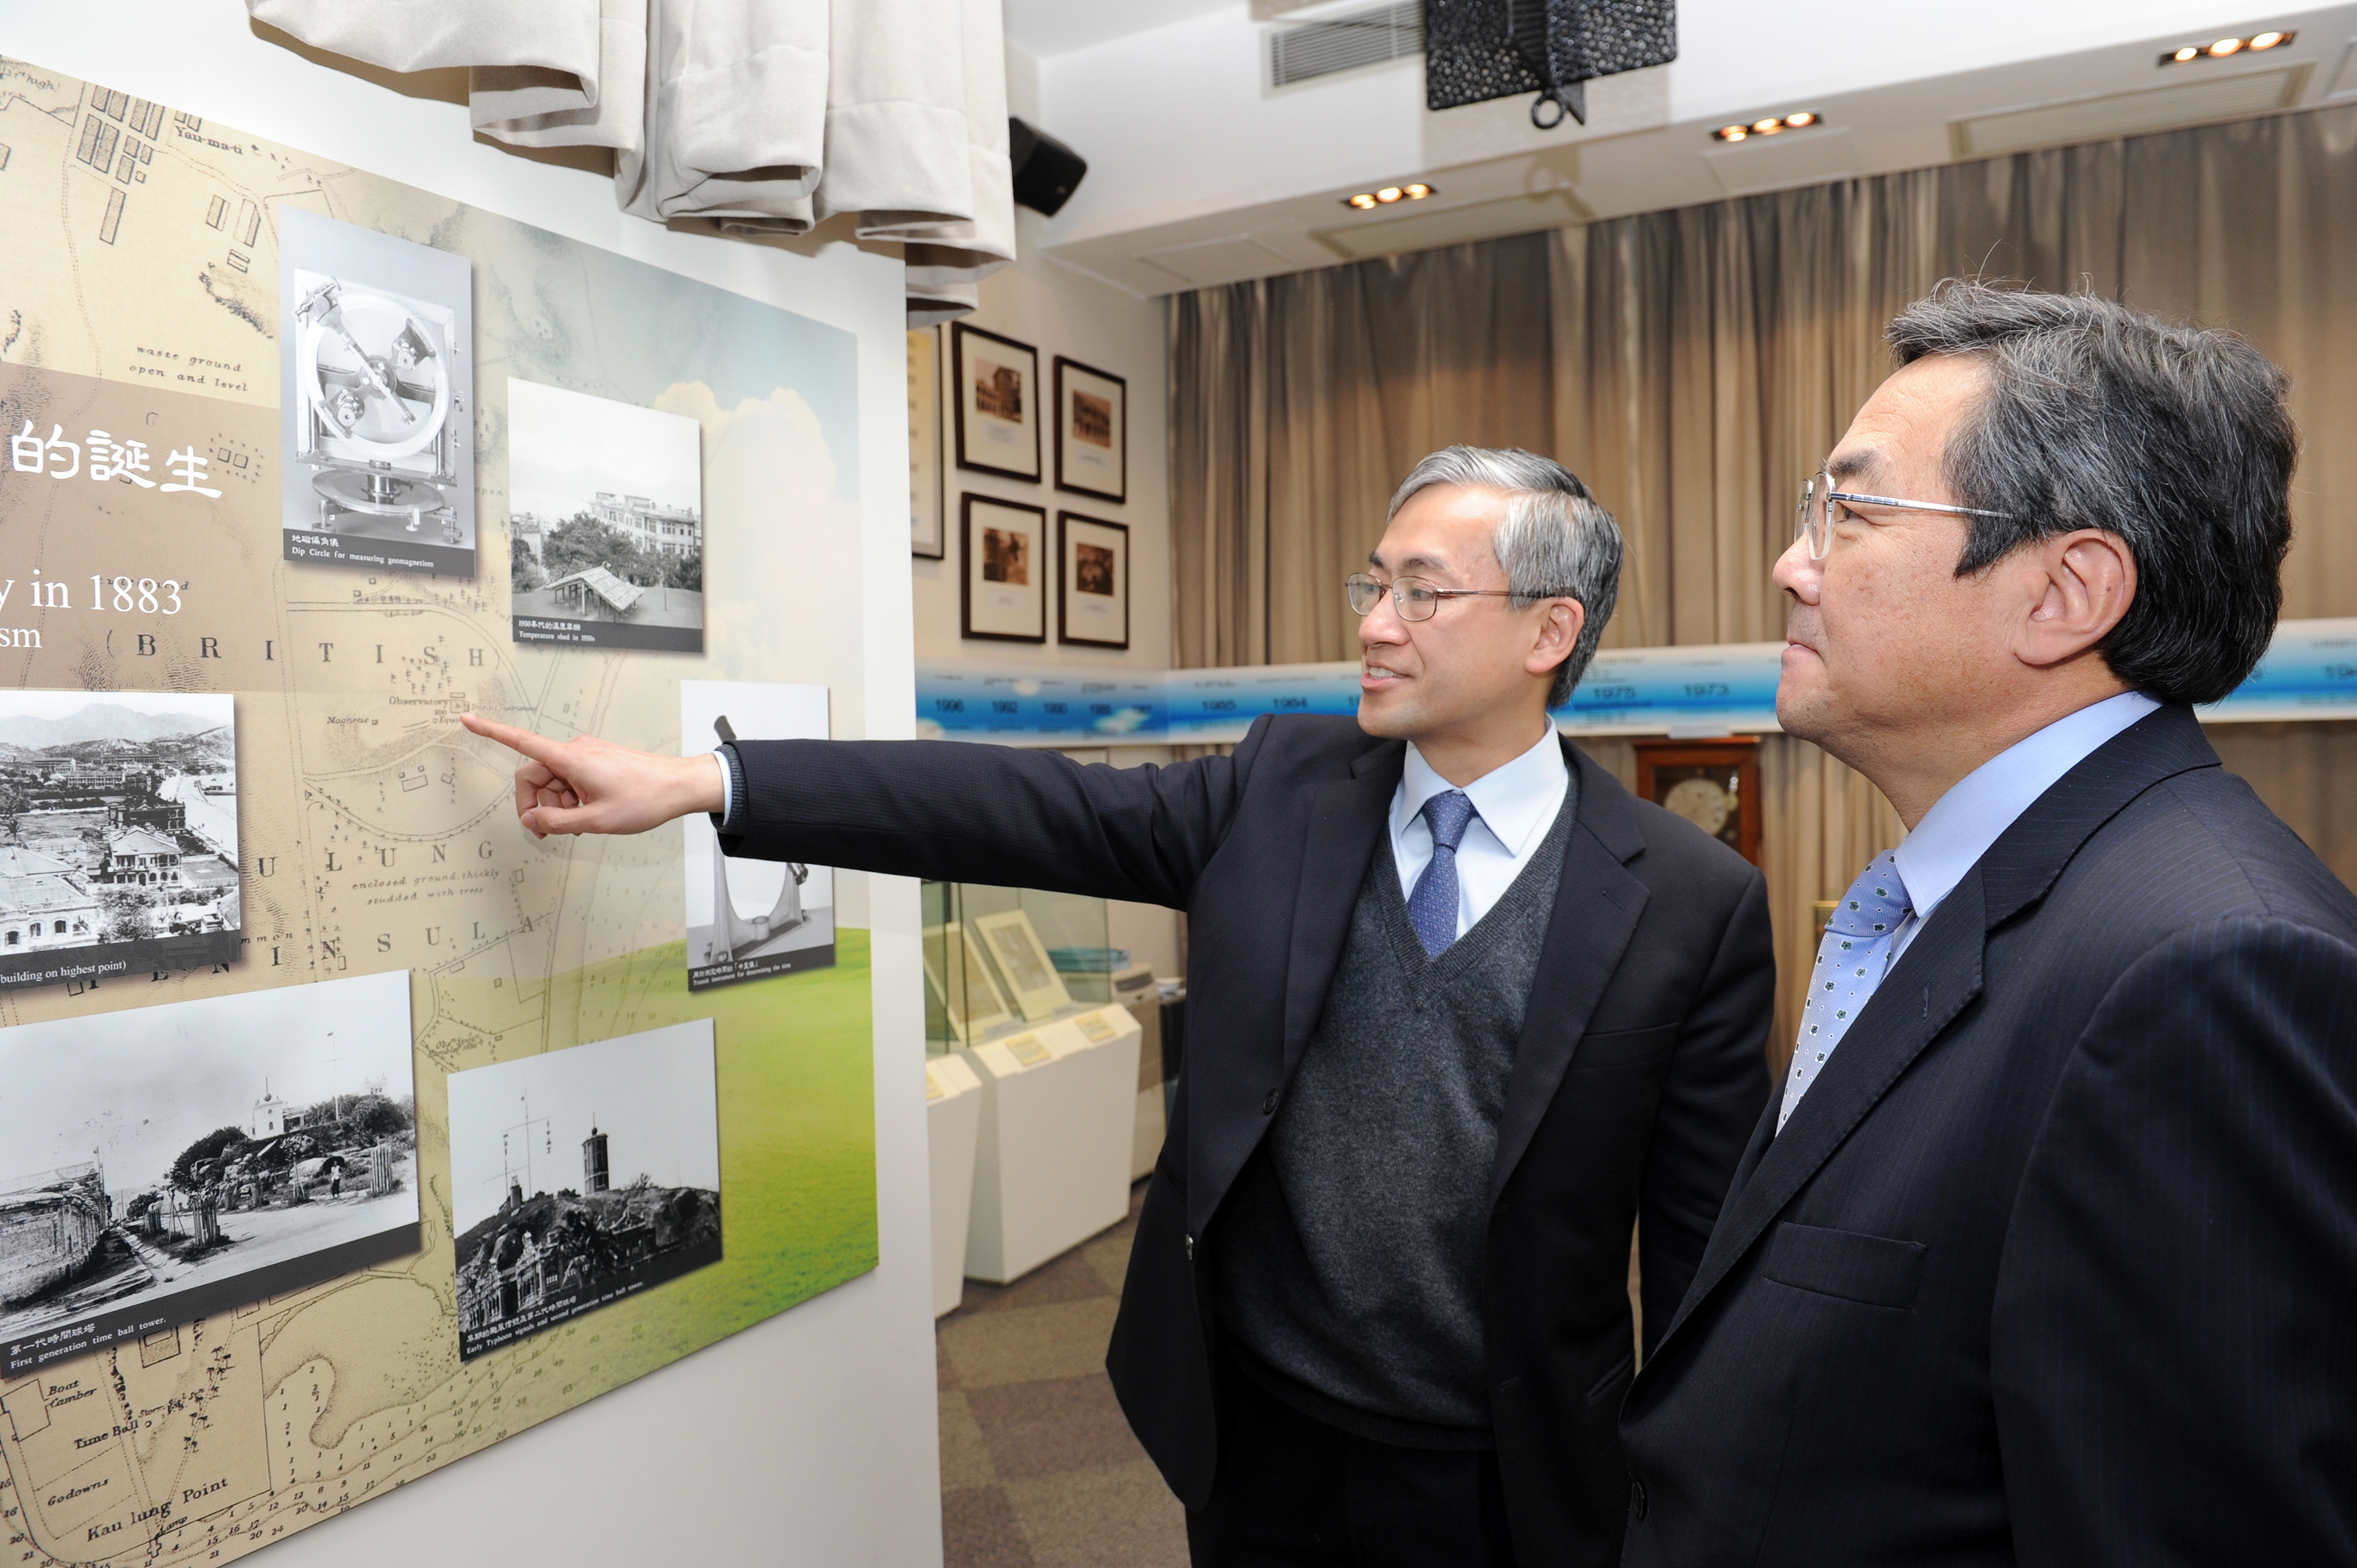 Mr SHUN Chi-ming (left), Director of the Hong Kong Observatory, introducing to Mr Koji SEKIMIZU the history of the Hong Kong Observatory and the meteorological services provided to the maritime community in the past 130 years.